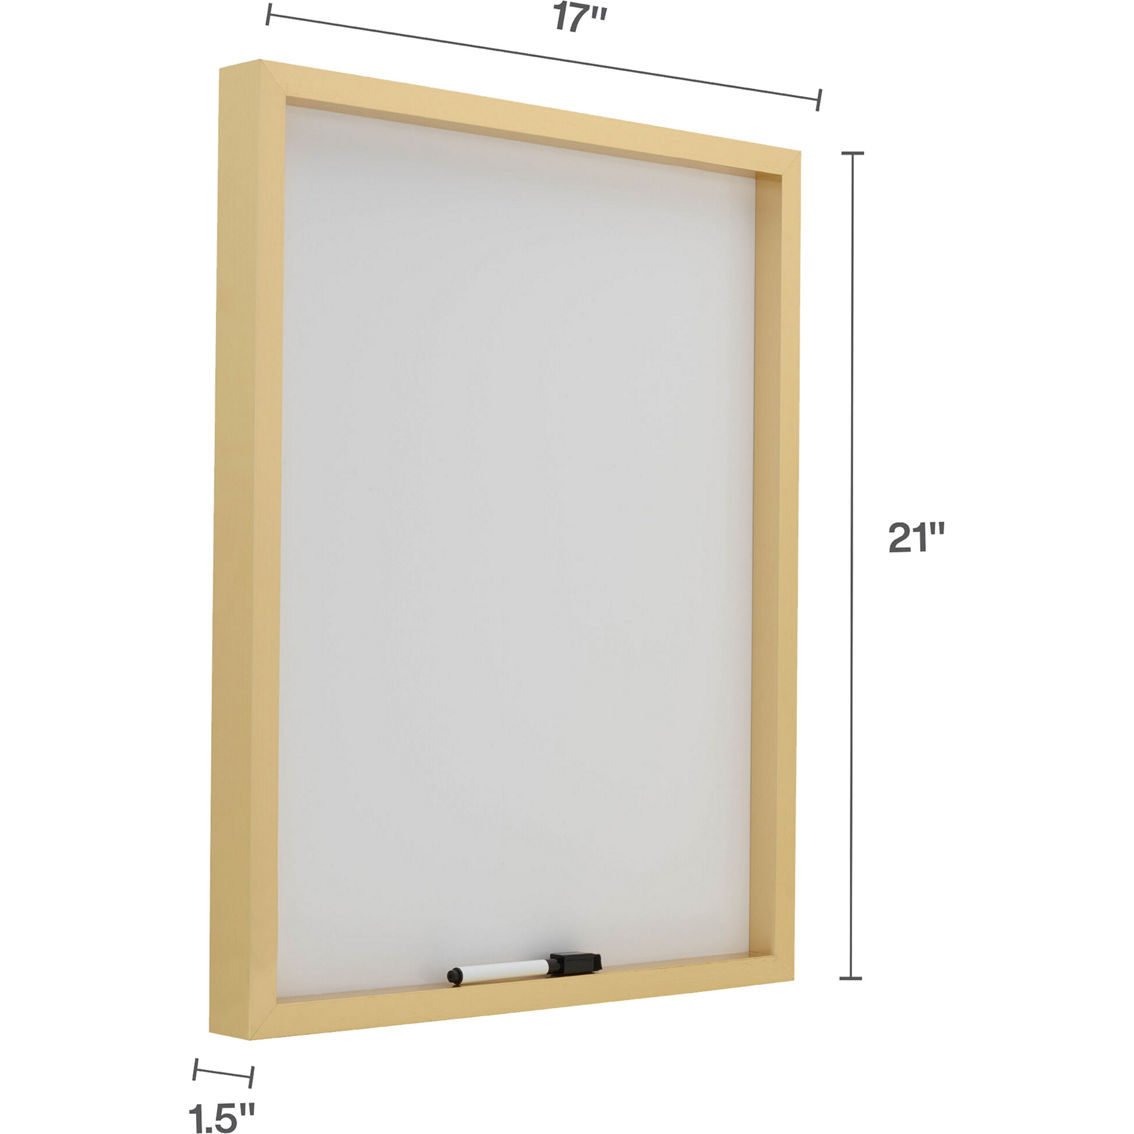 Mikasa Home 21 in. x 17 in. Metal Gold Whiteboard with Pen - Image 2 of 3